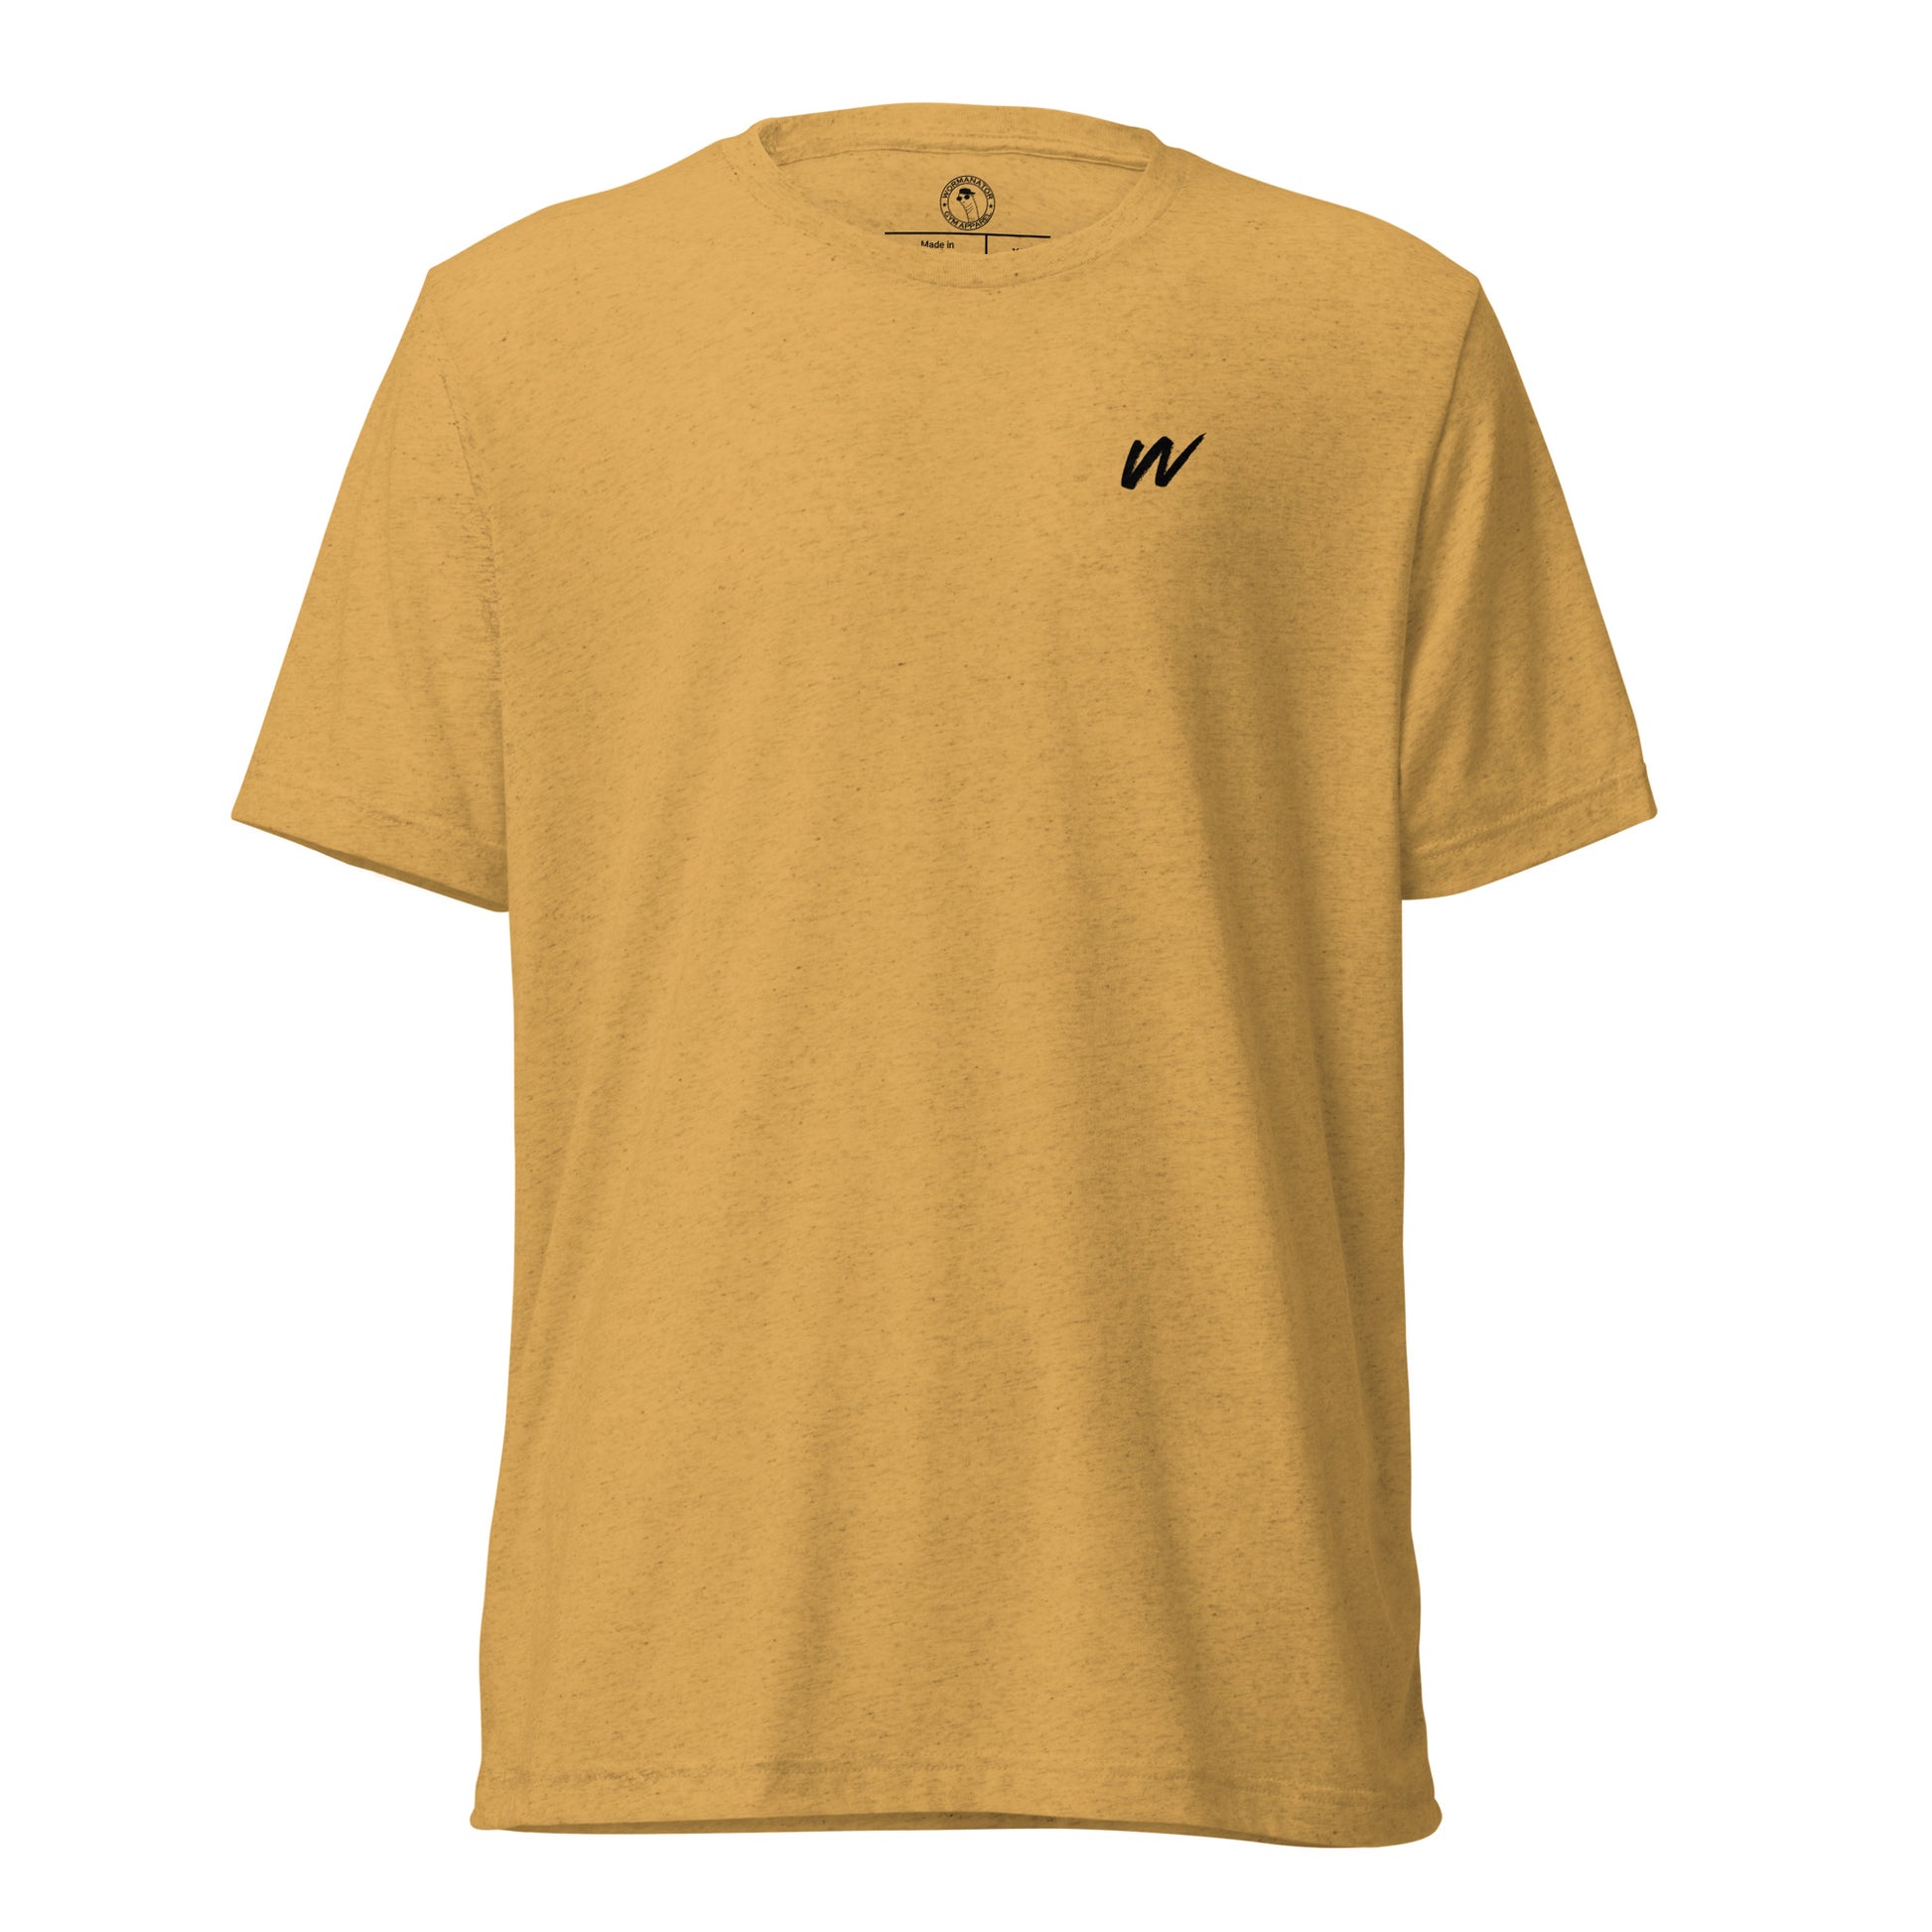 Win the Day T-Shirt in Mustard Triblend